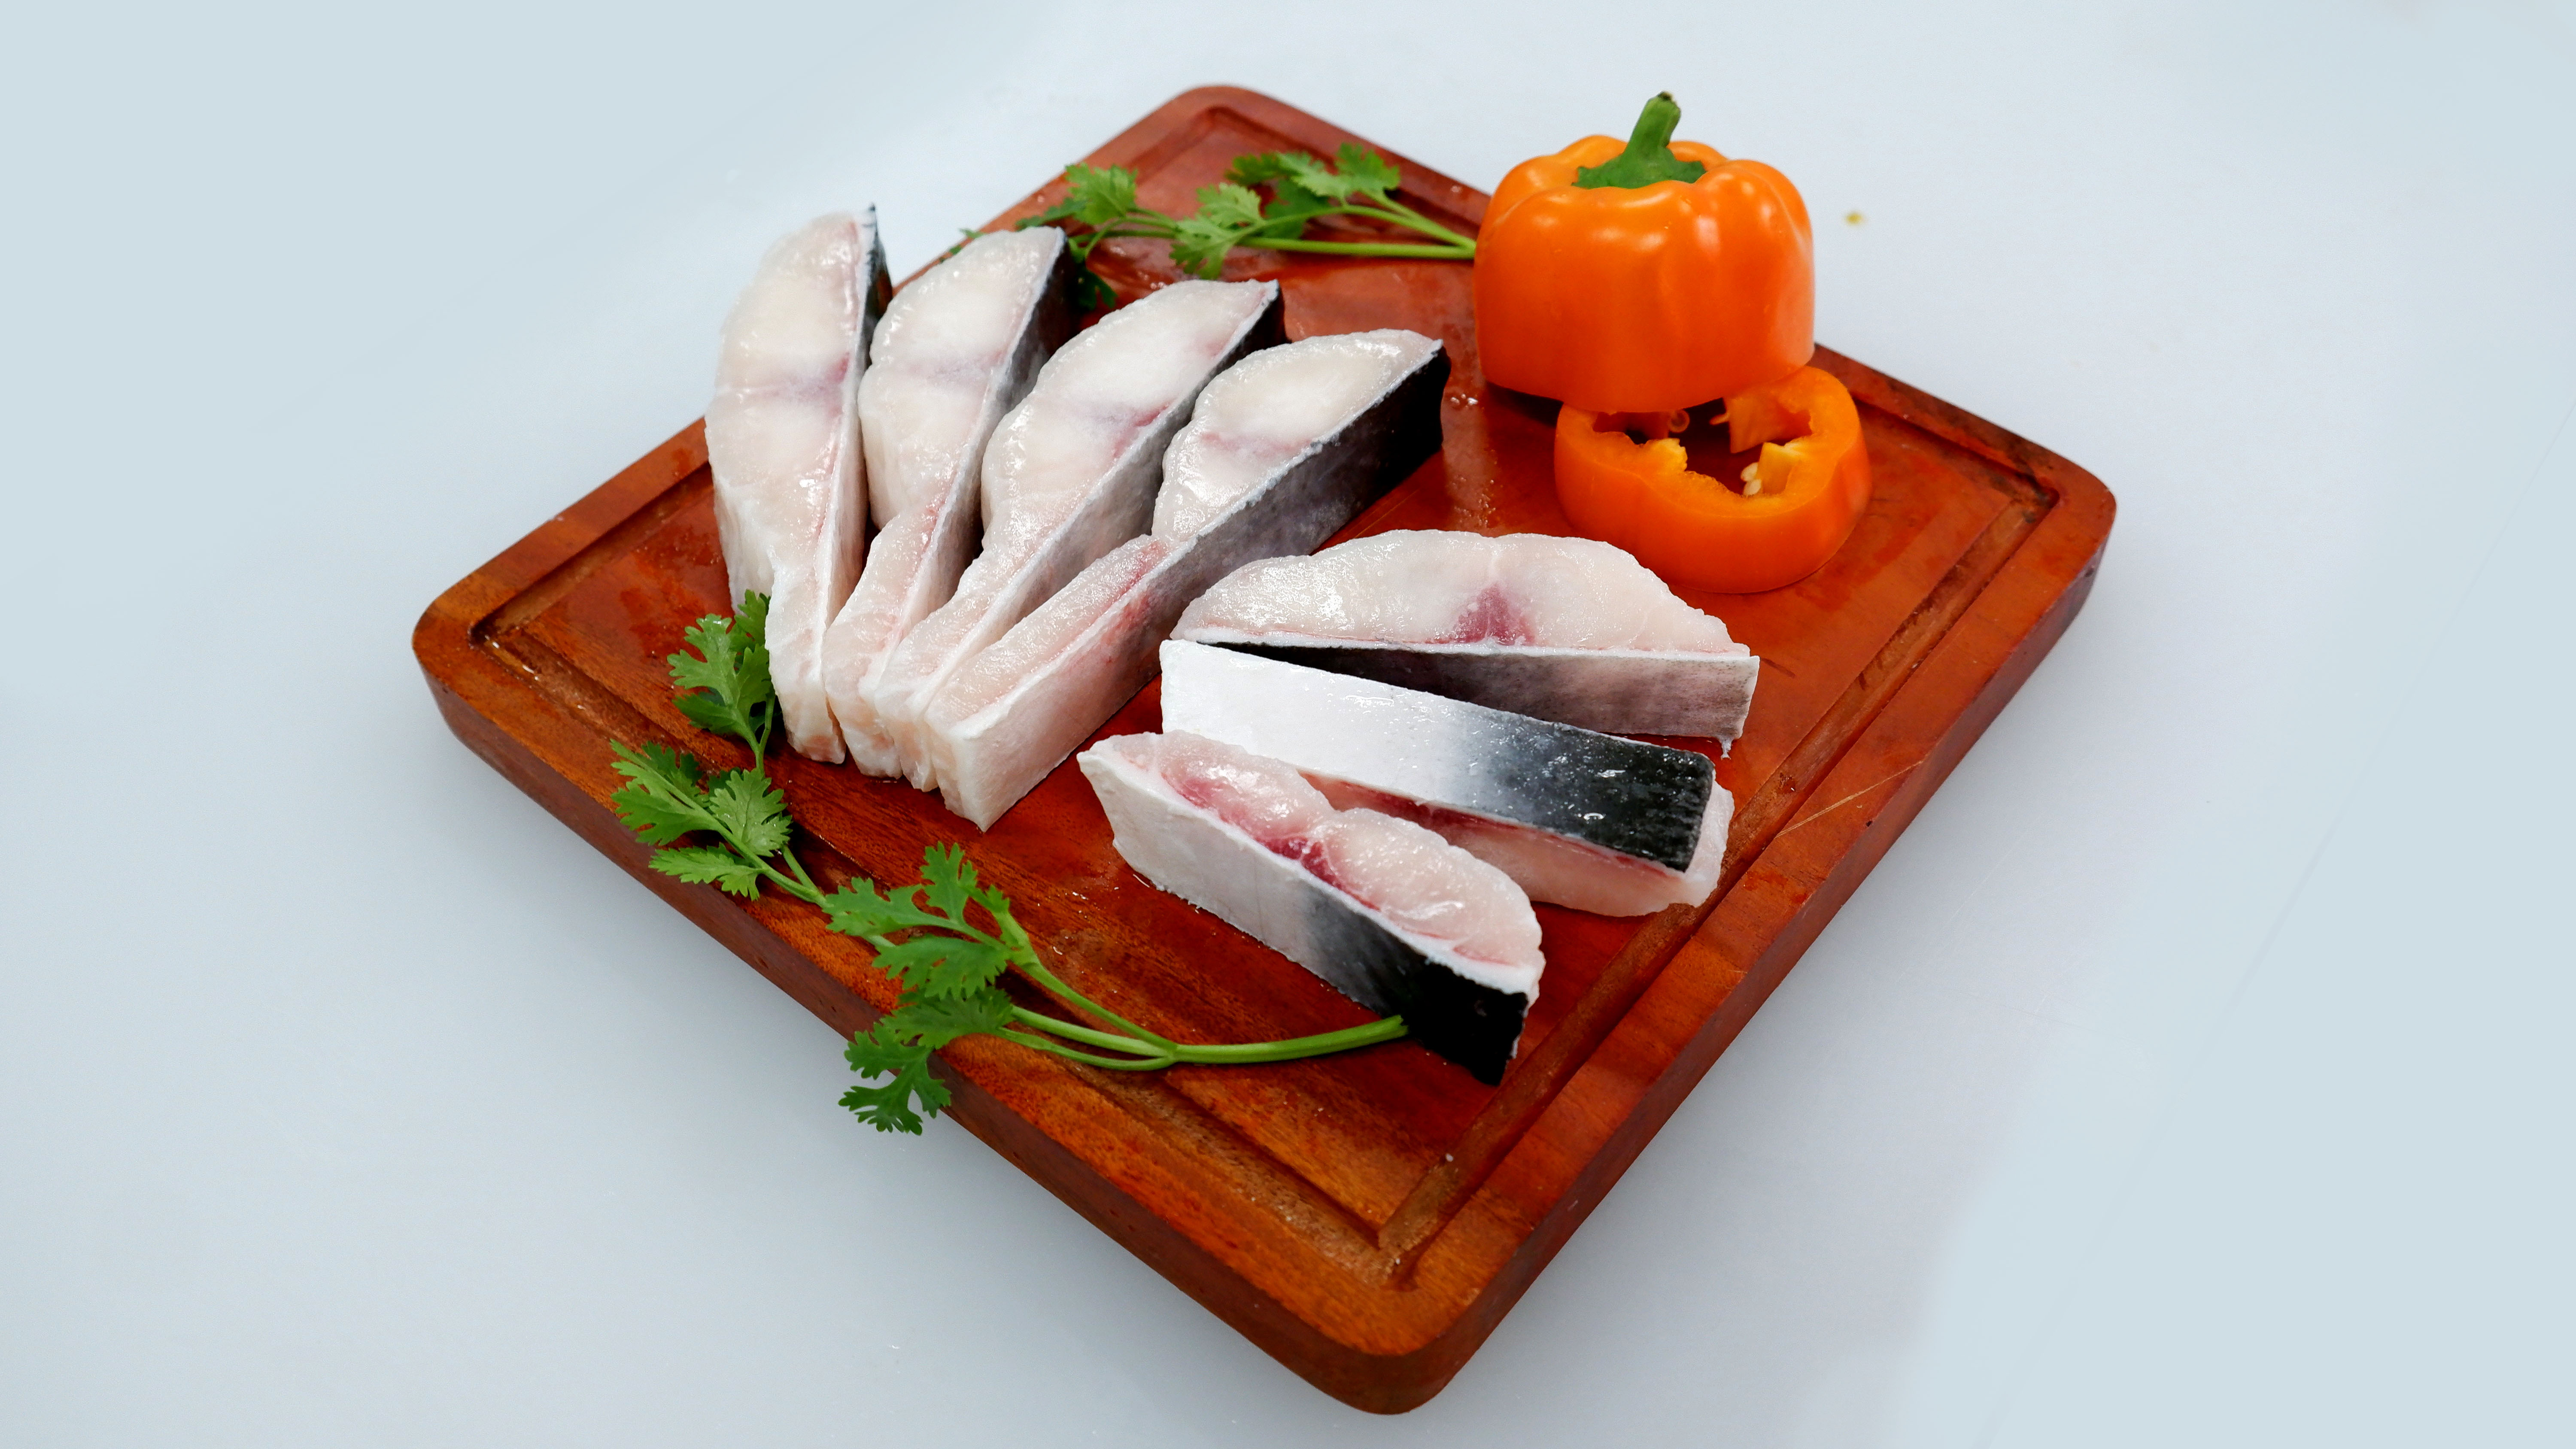 <span  class="uc_style_uc_tiles_grid_image_elementor_uc_items_attribute_title" style="color:#ffffff;">Pangasius Slice</span>